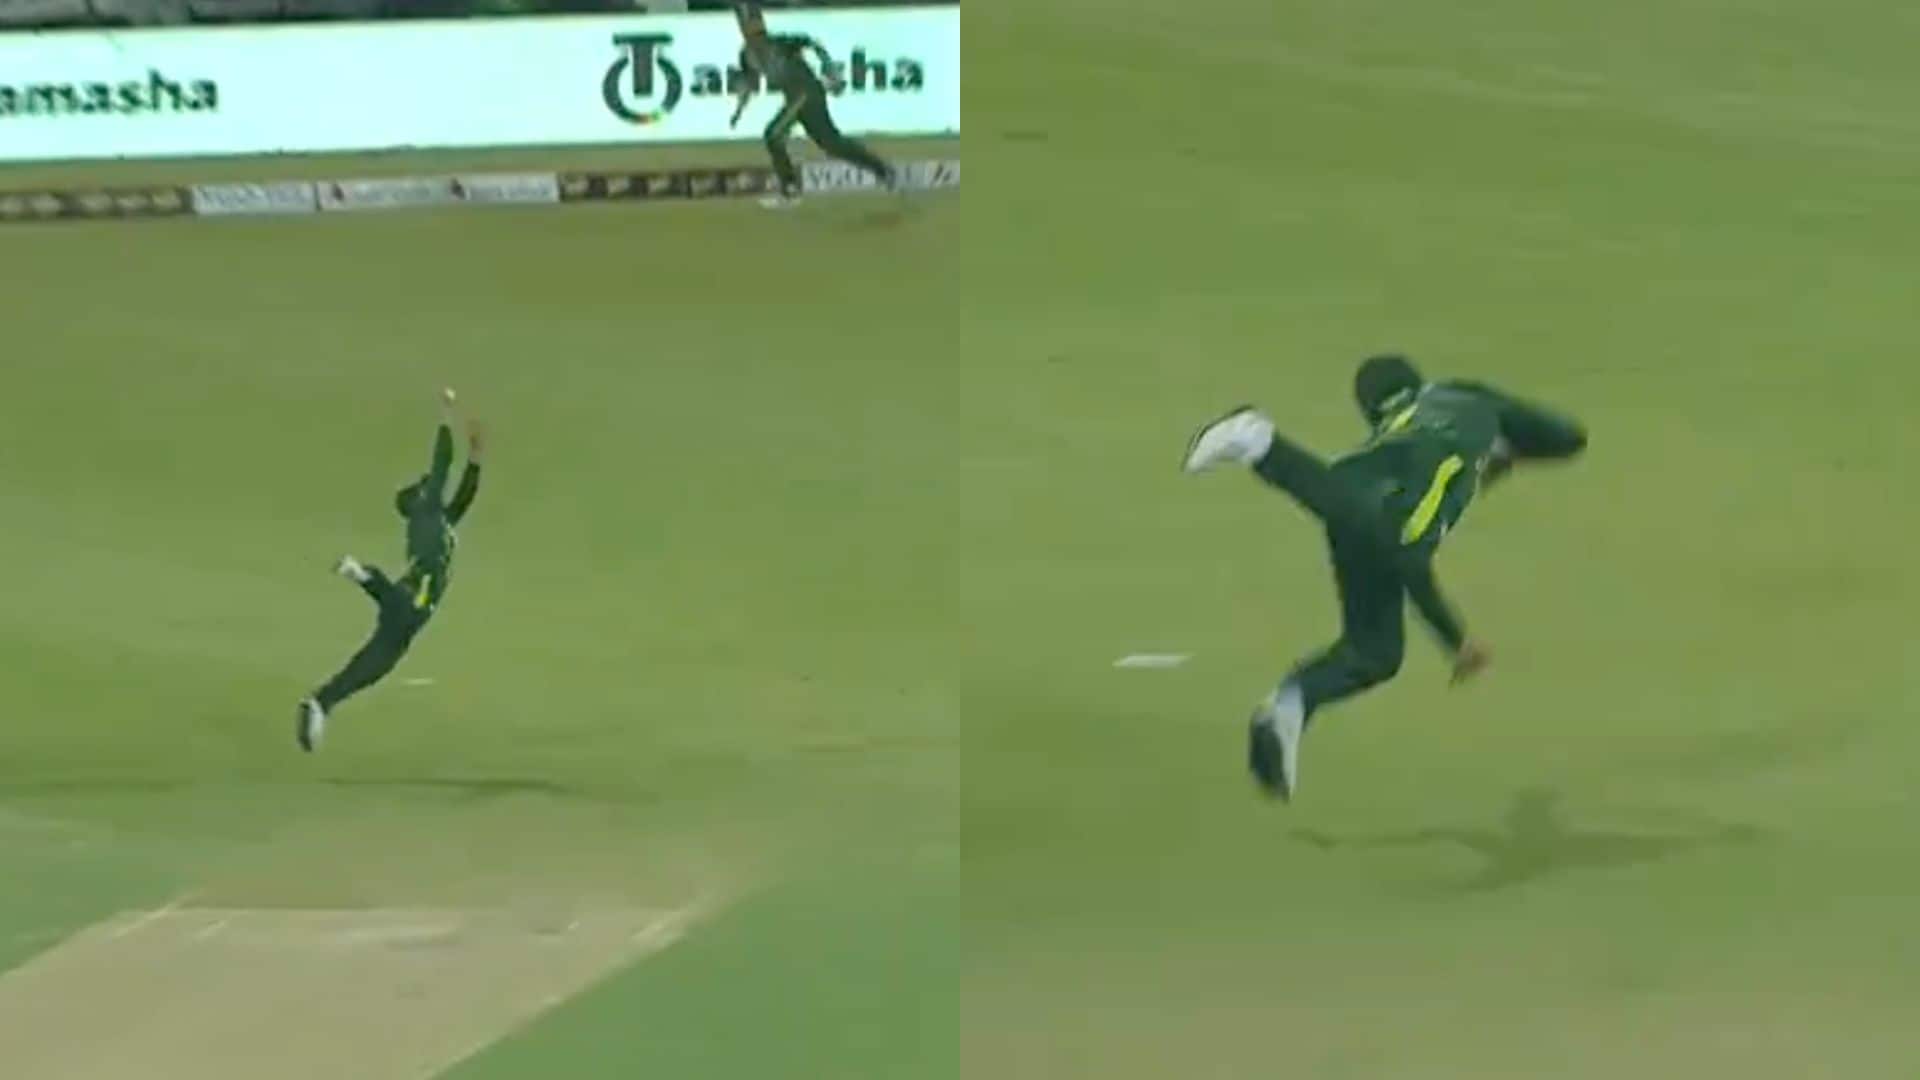 Shadab's clinical catch to get Chapman [X.com]